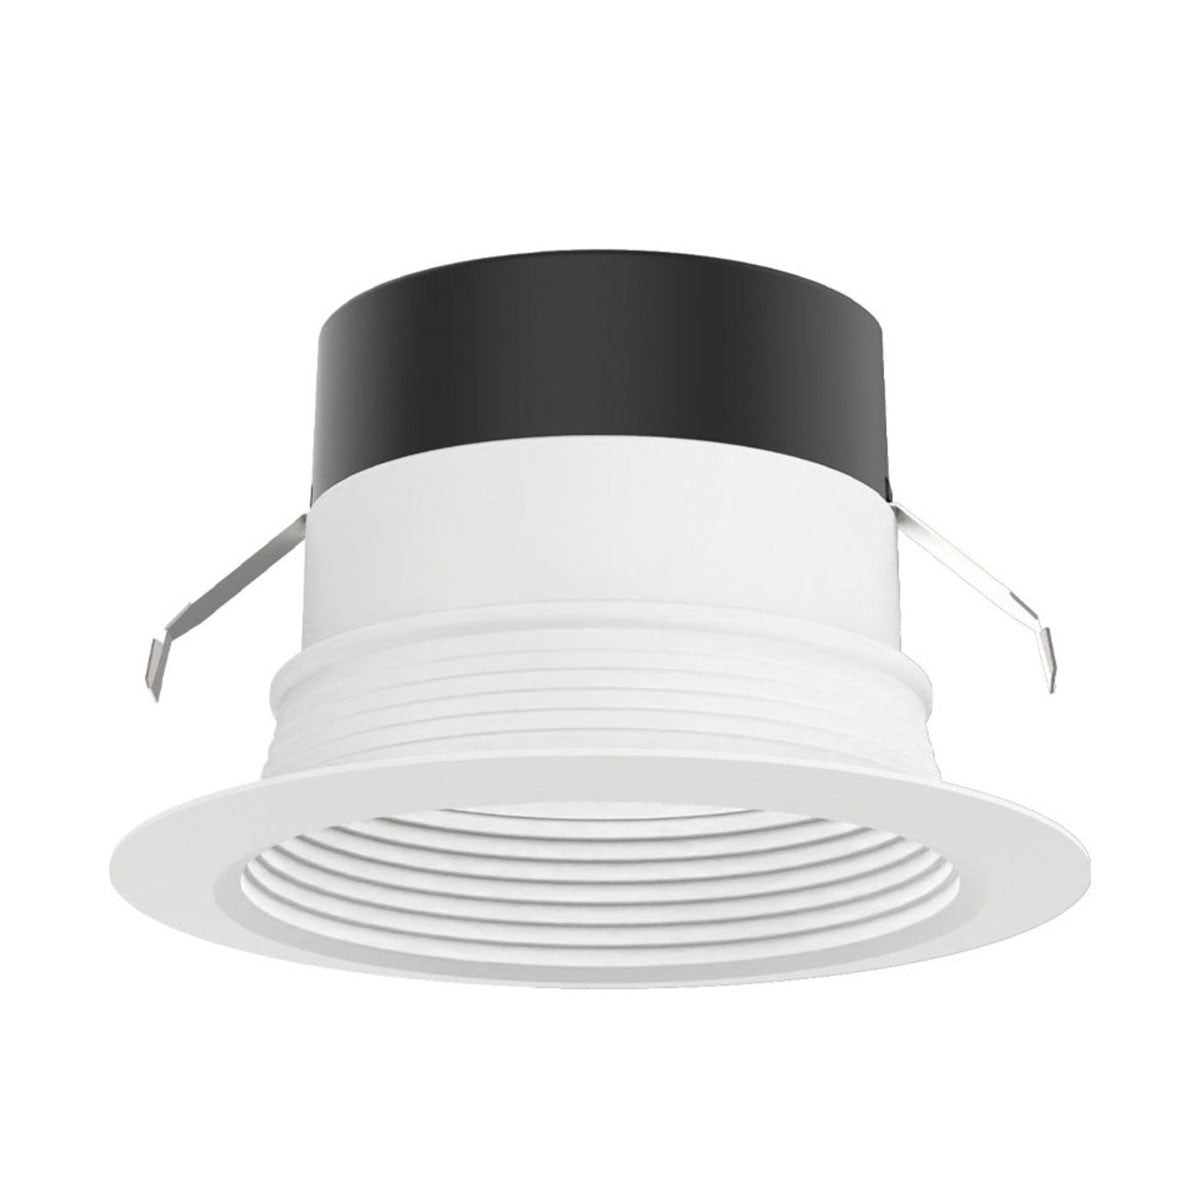 4 Inch Recessed LED Can Light, Round, 8 Watt, 700 Lumens, Selectable CCT, 2700K to 5000K, Baffle Trim